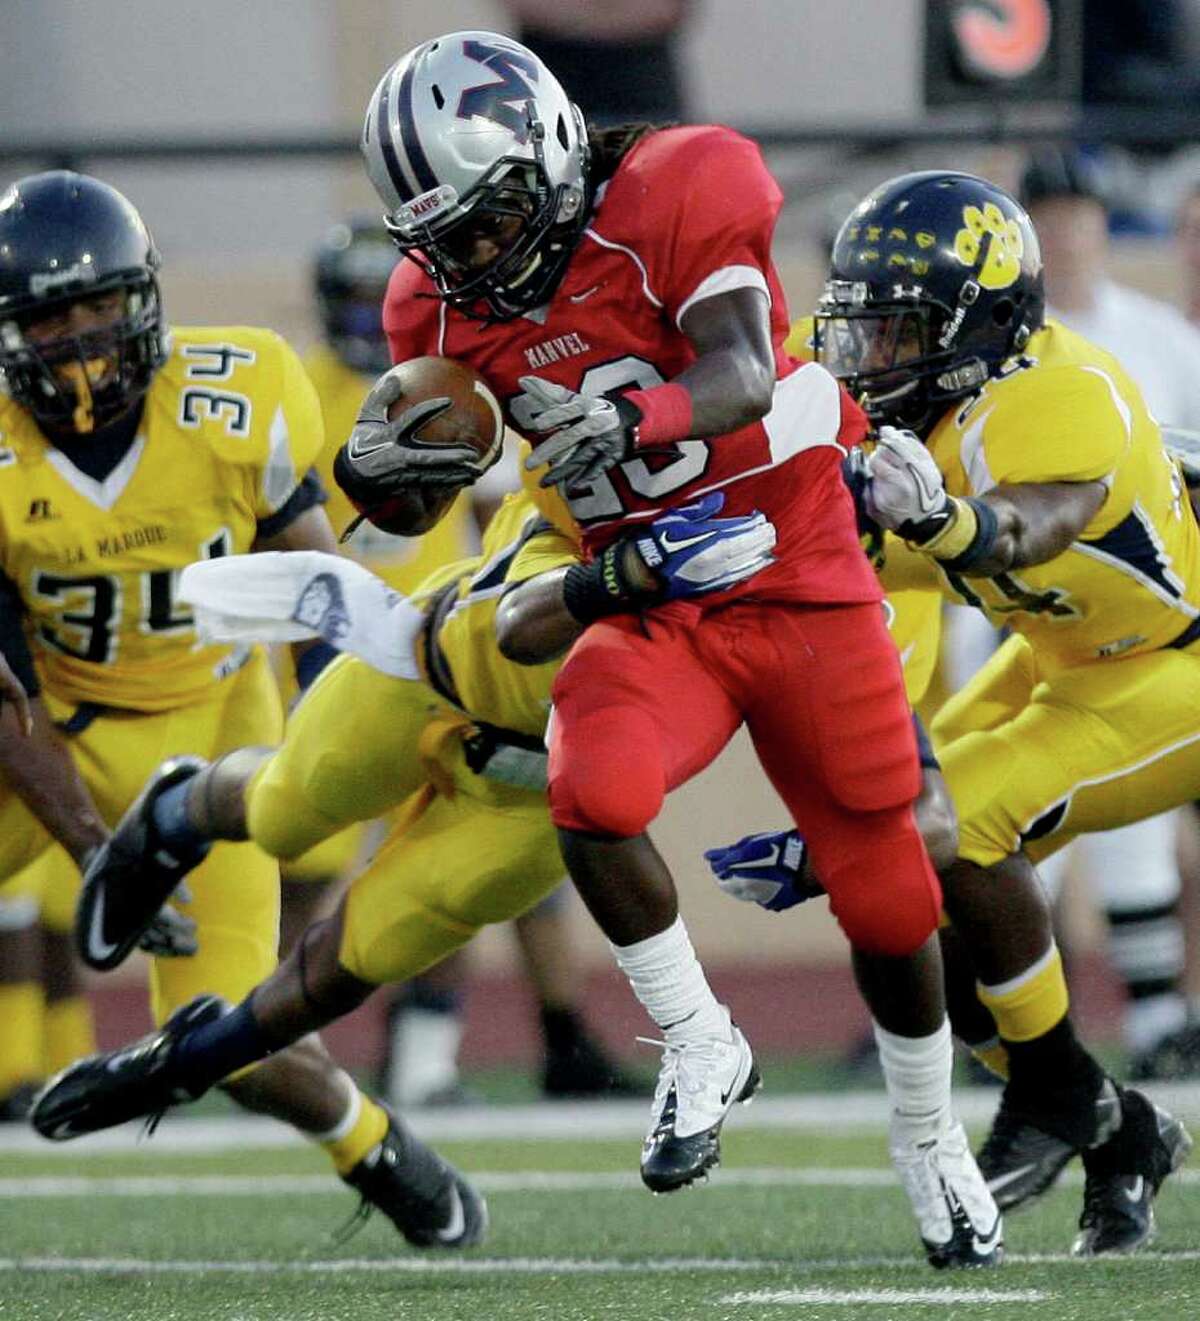 9/23/11: Running back Selwyn Green #29 of the Manvel Mavericks rushes against defensive back Myles Drisdale #6 of the La Marque Cougars in the opening of District 24-4A high school football game at Alvin Memorial Stadium in Alvin, Texas. For the Chronicle: Thomas B. Shea